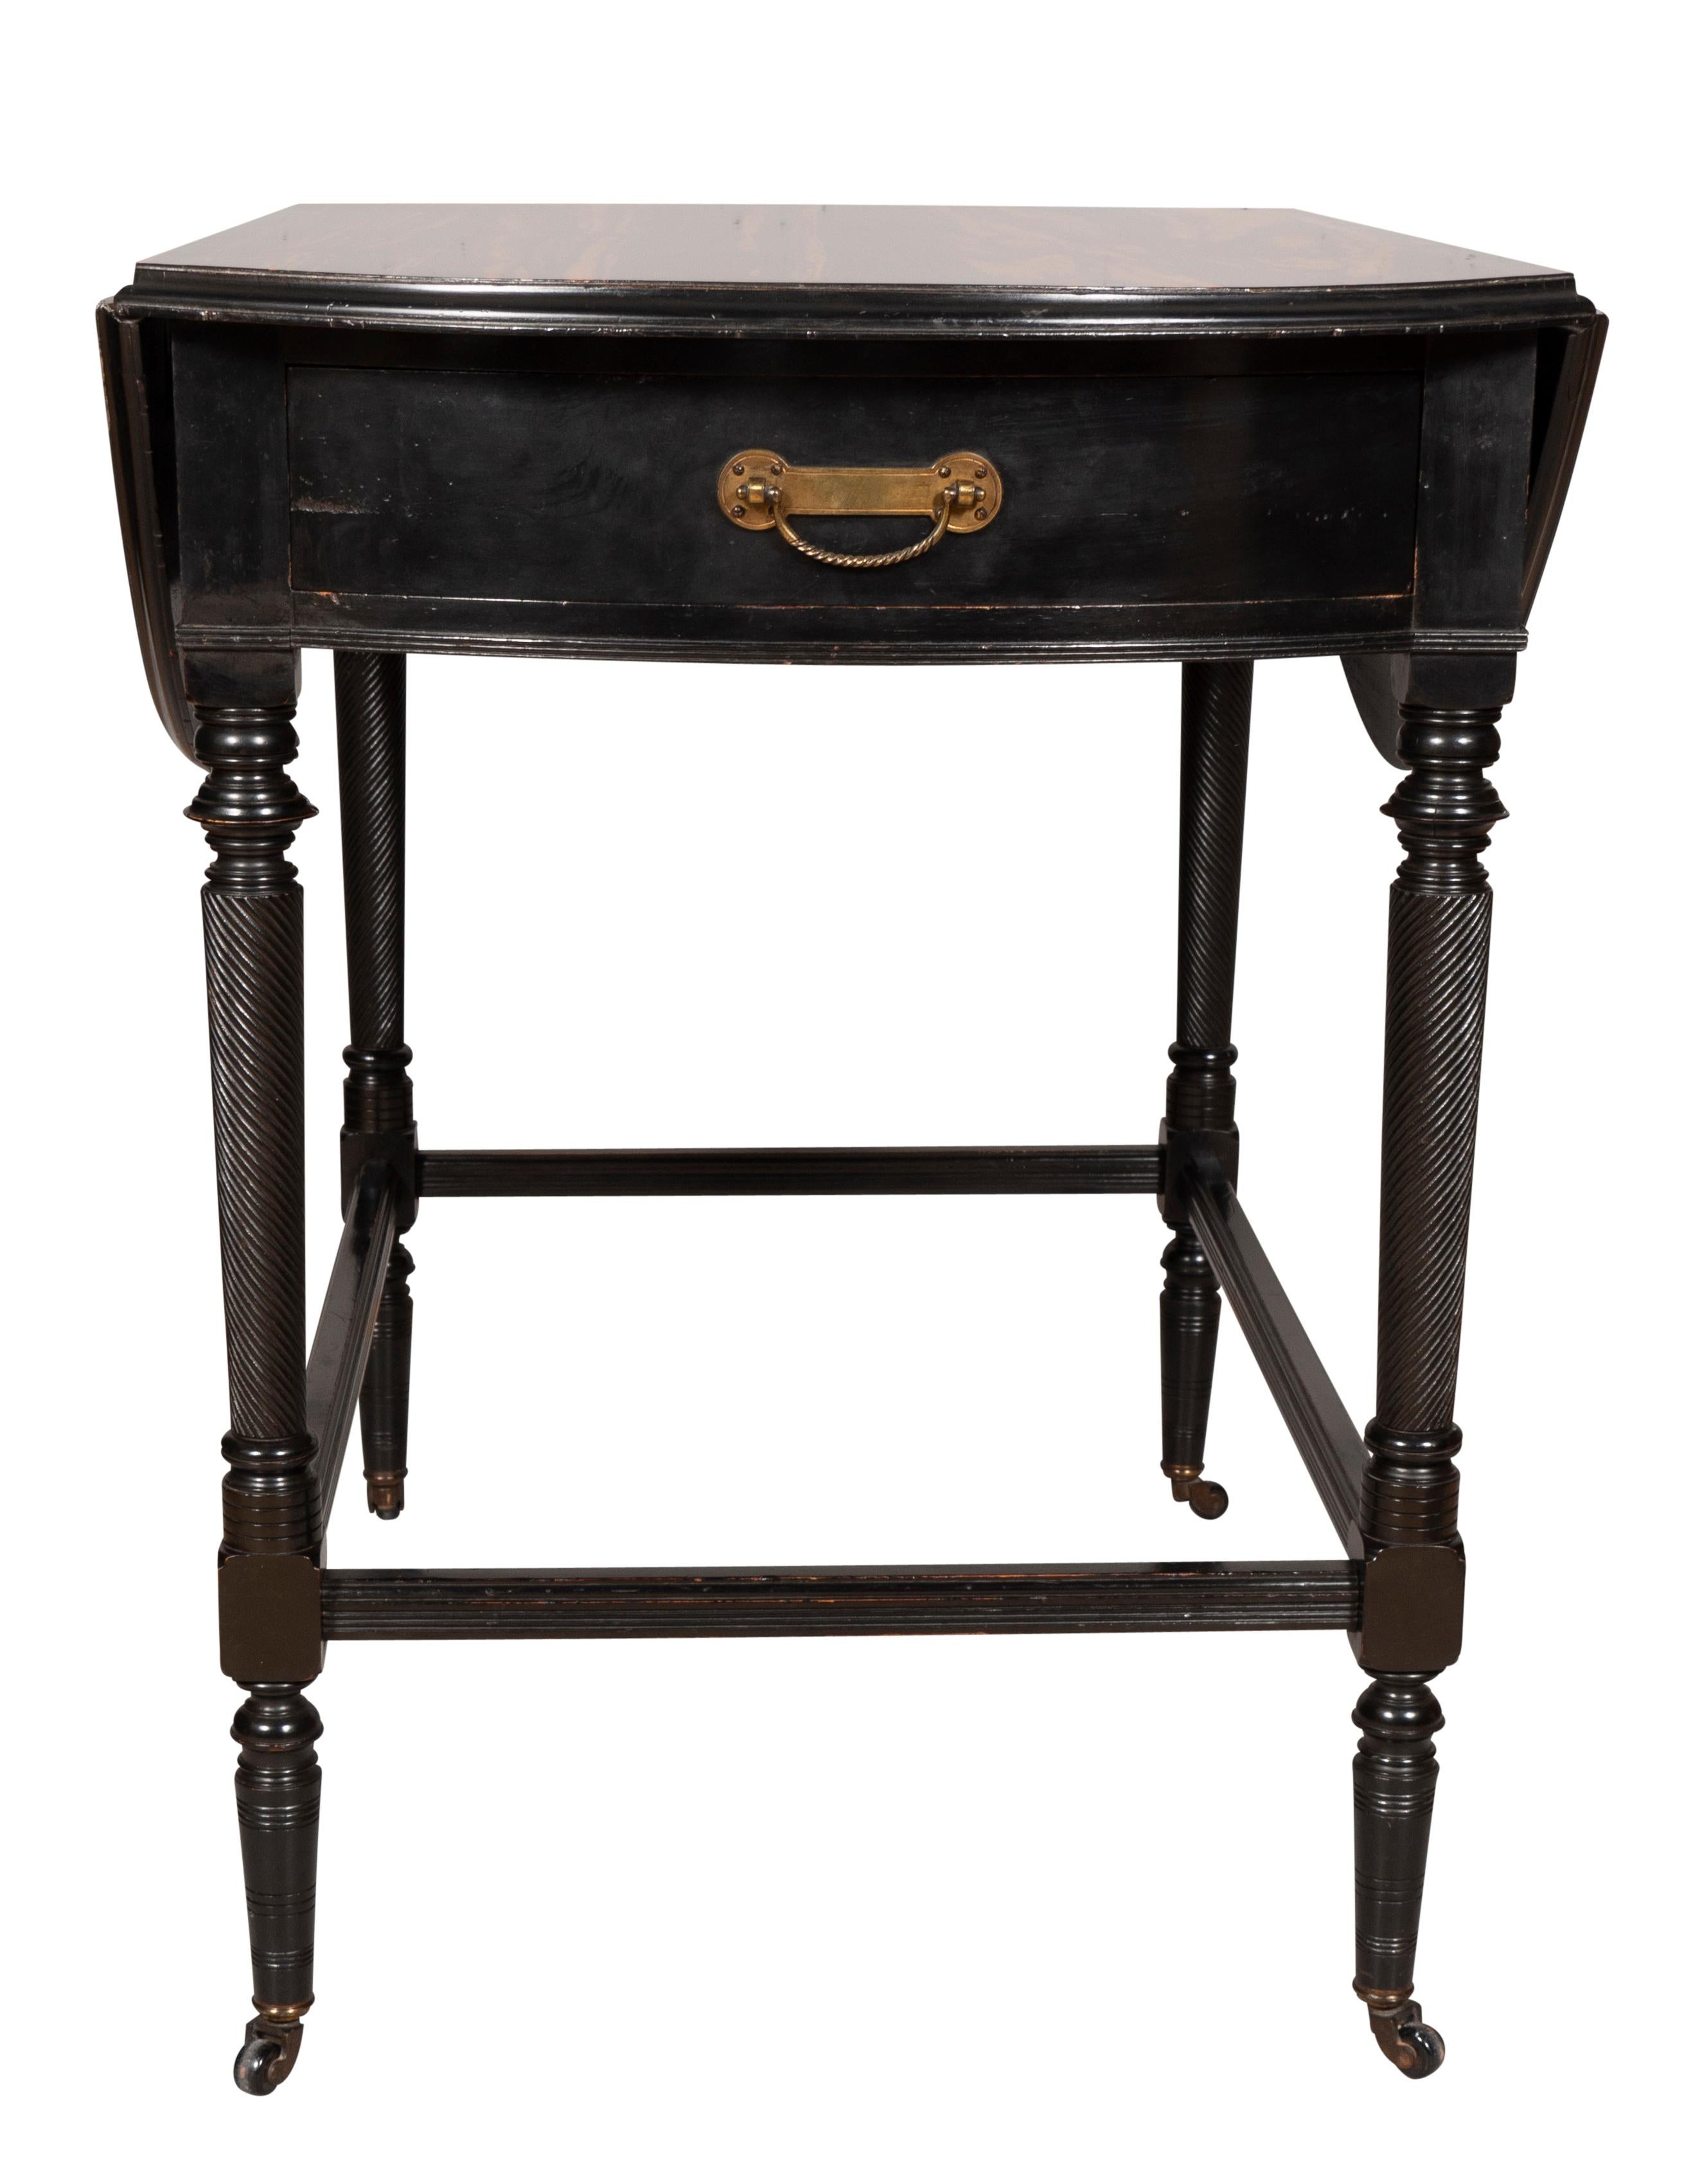 Aesthetic Movement Calamander and Ebonized Pembroke Table For Sale 5